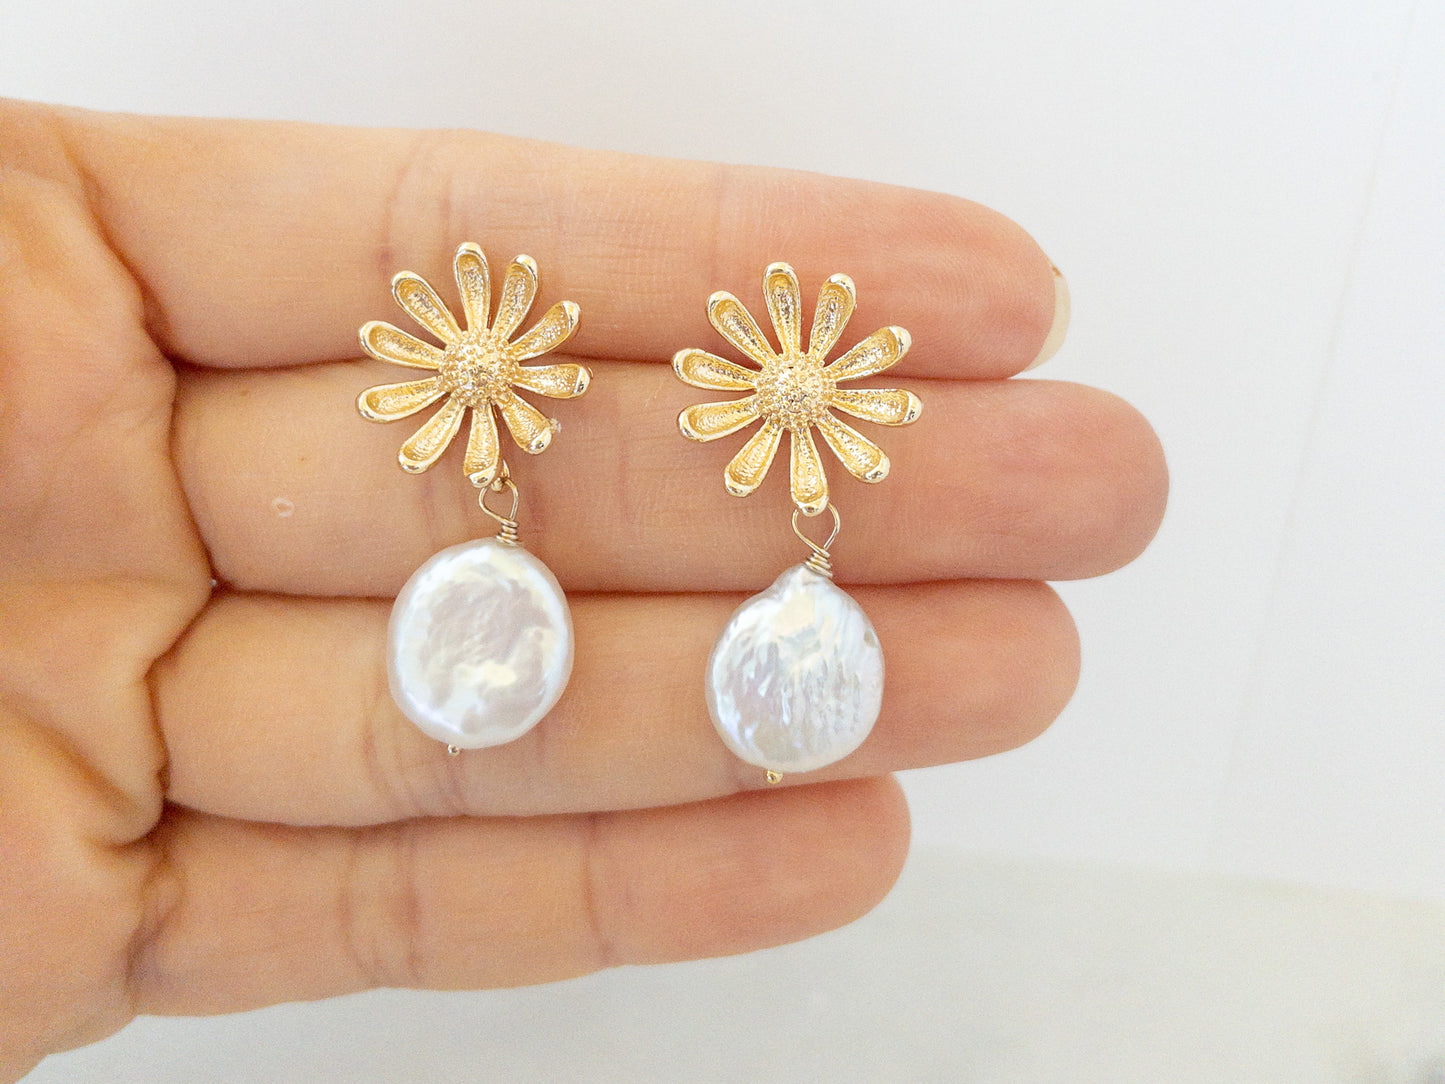 Daisy Earrings with Pearls